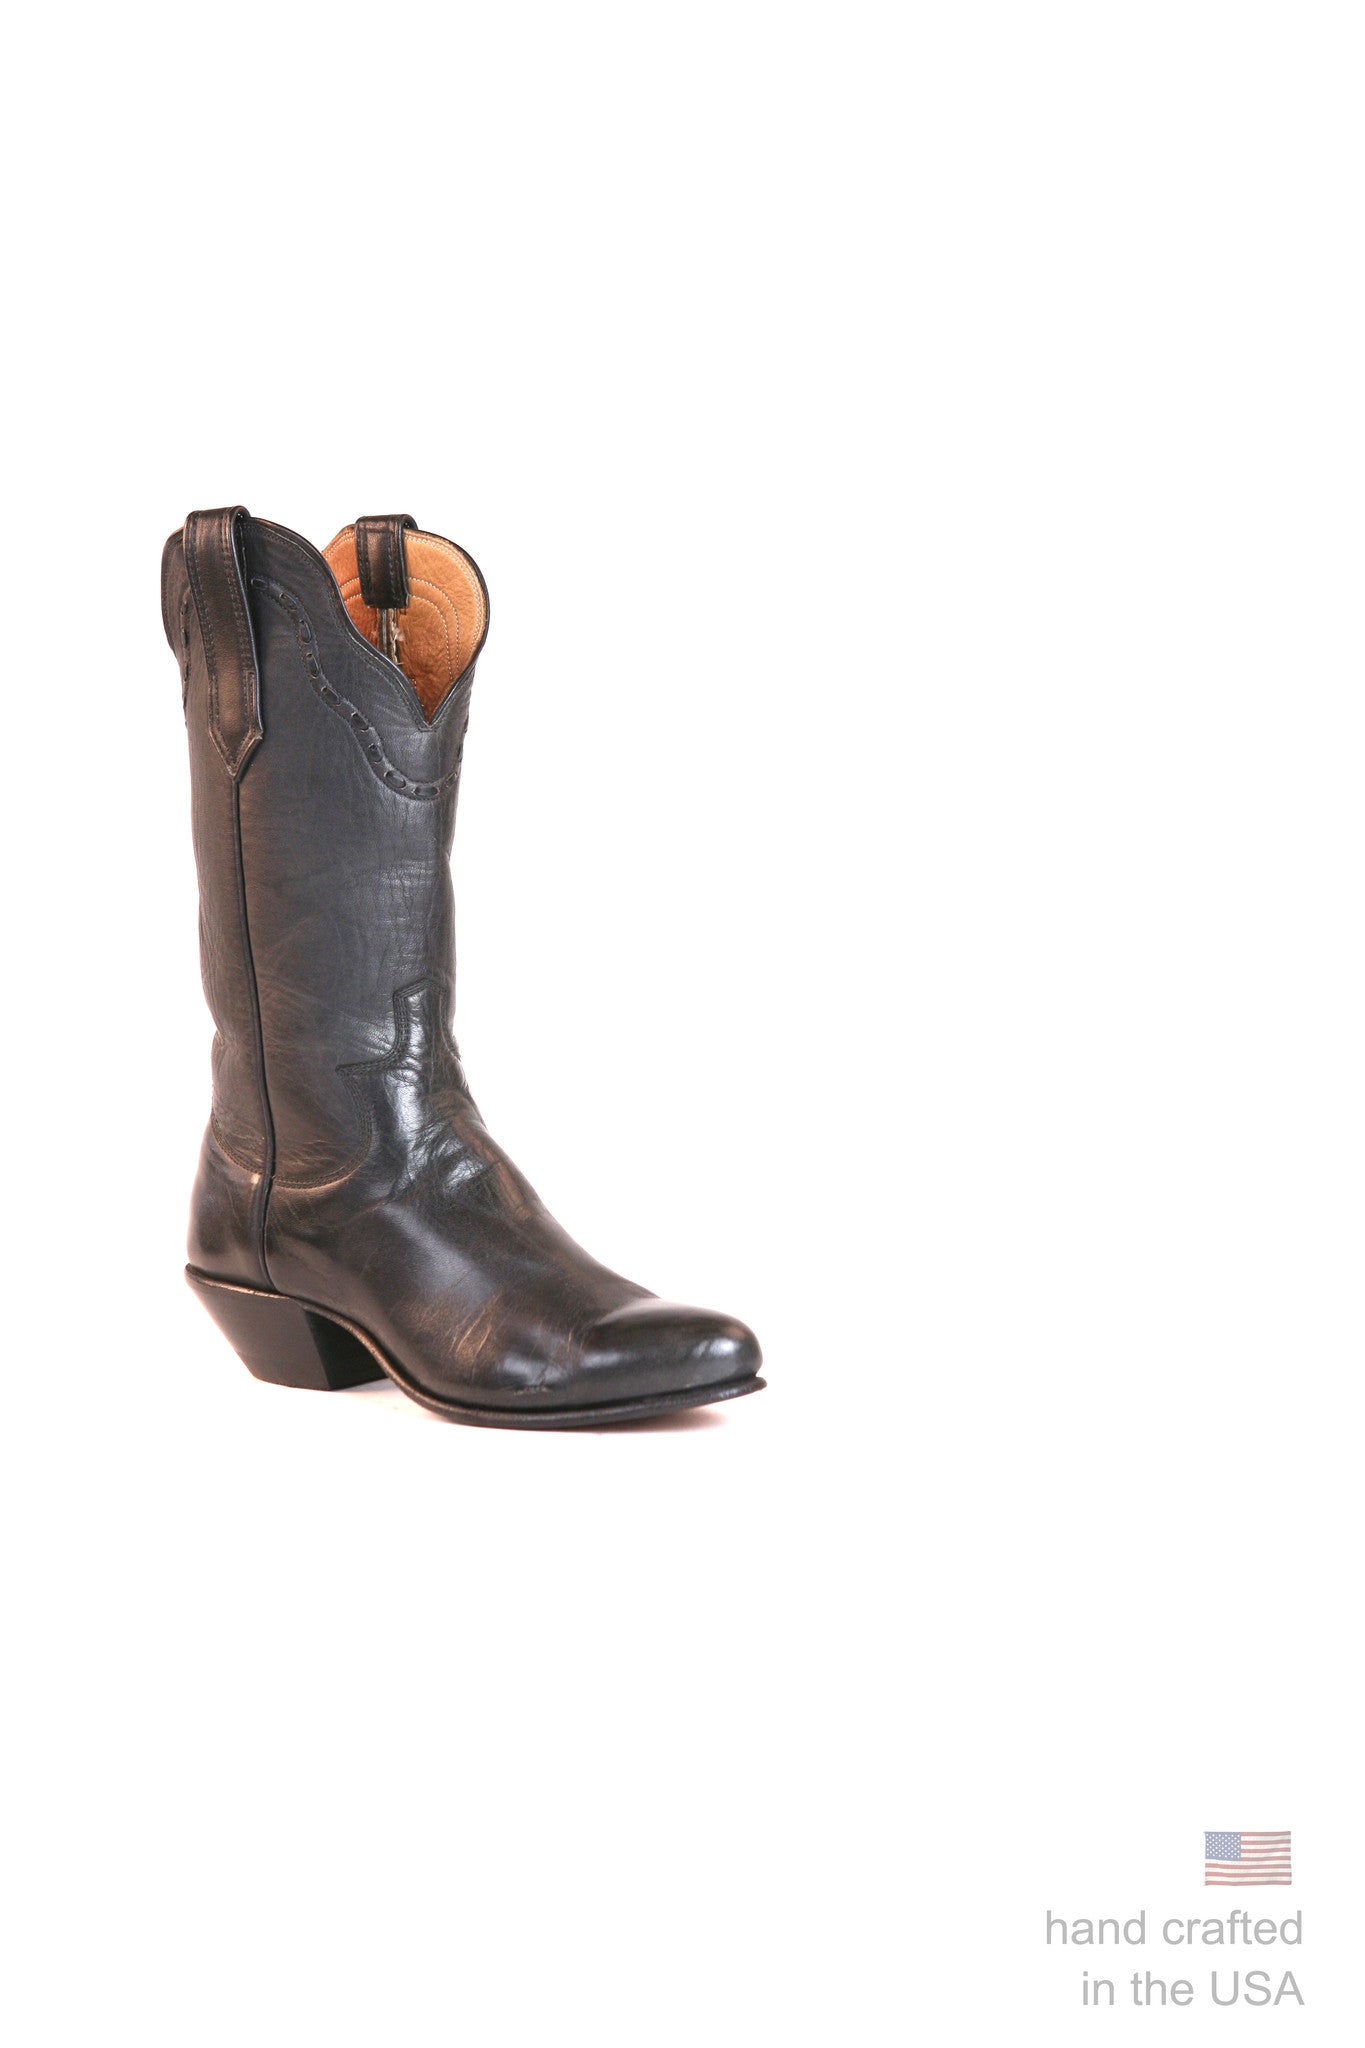 Singles: Boot 0036: Size 6A